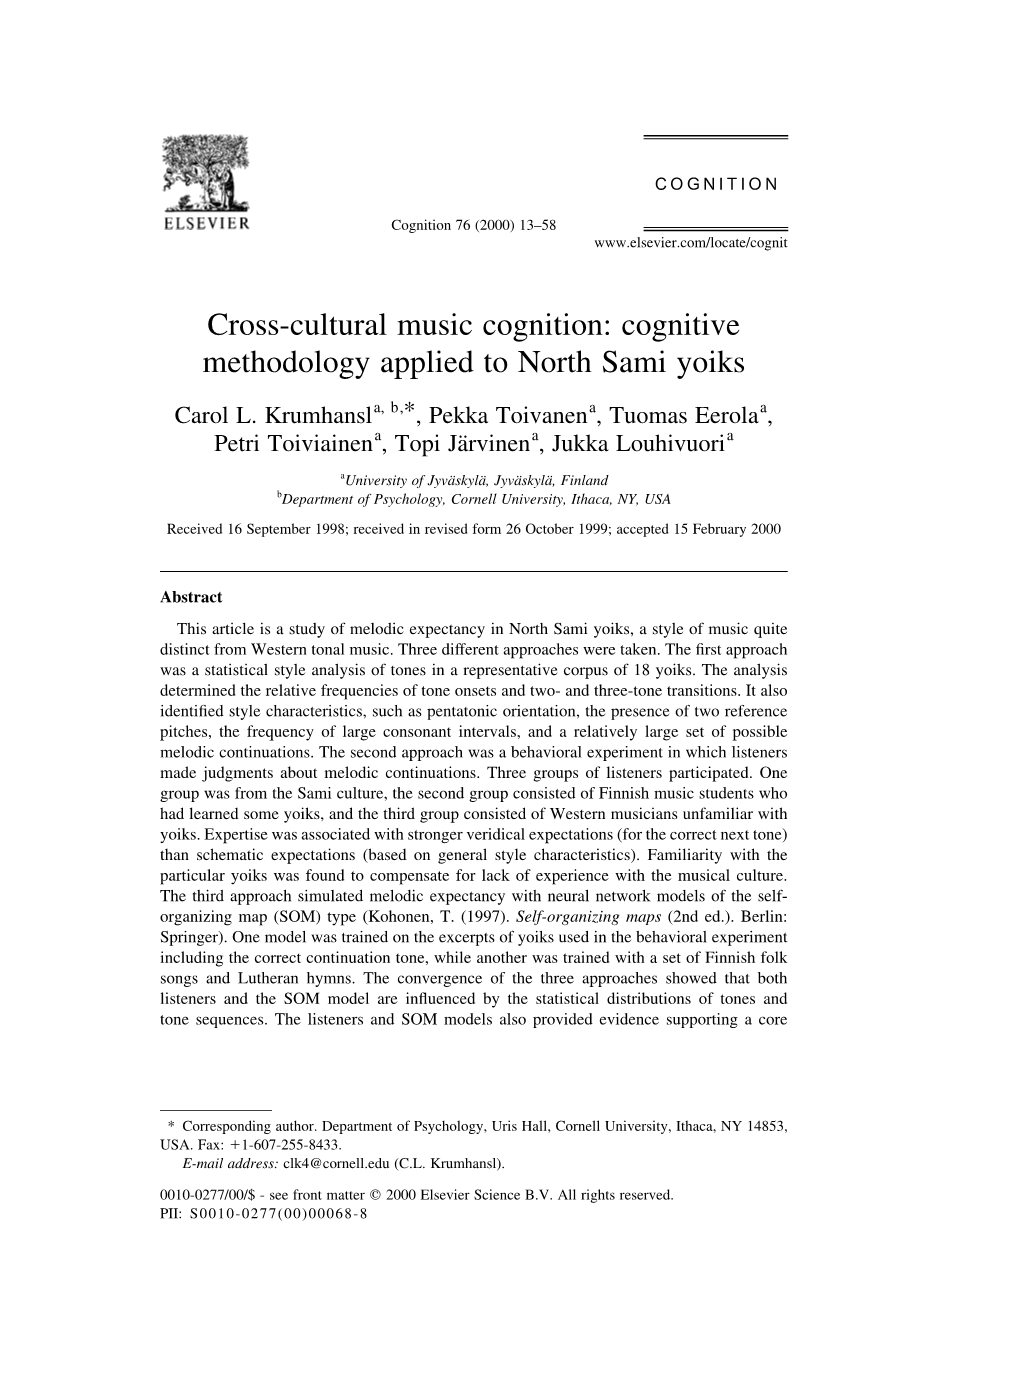 Cognitive Methodology Applied to North Sami Yoiks